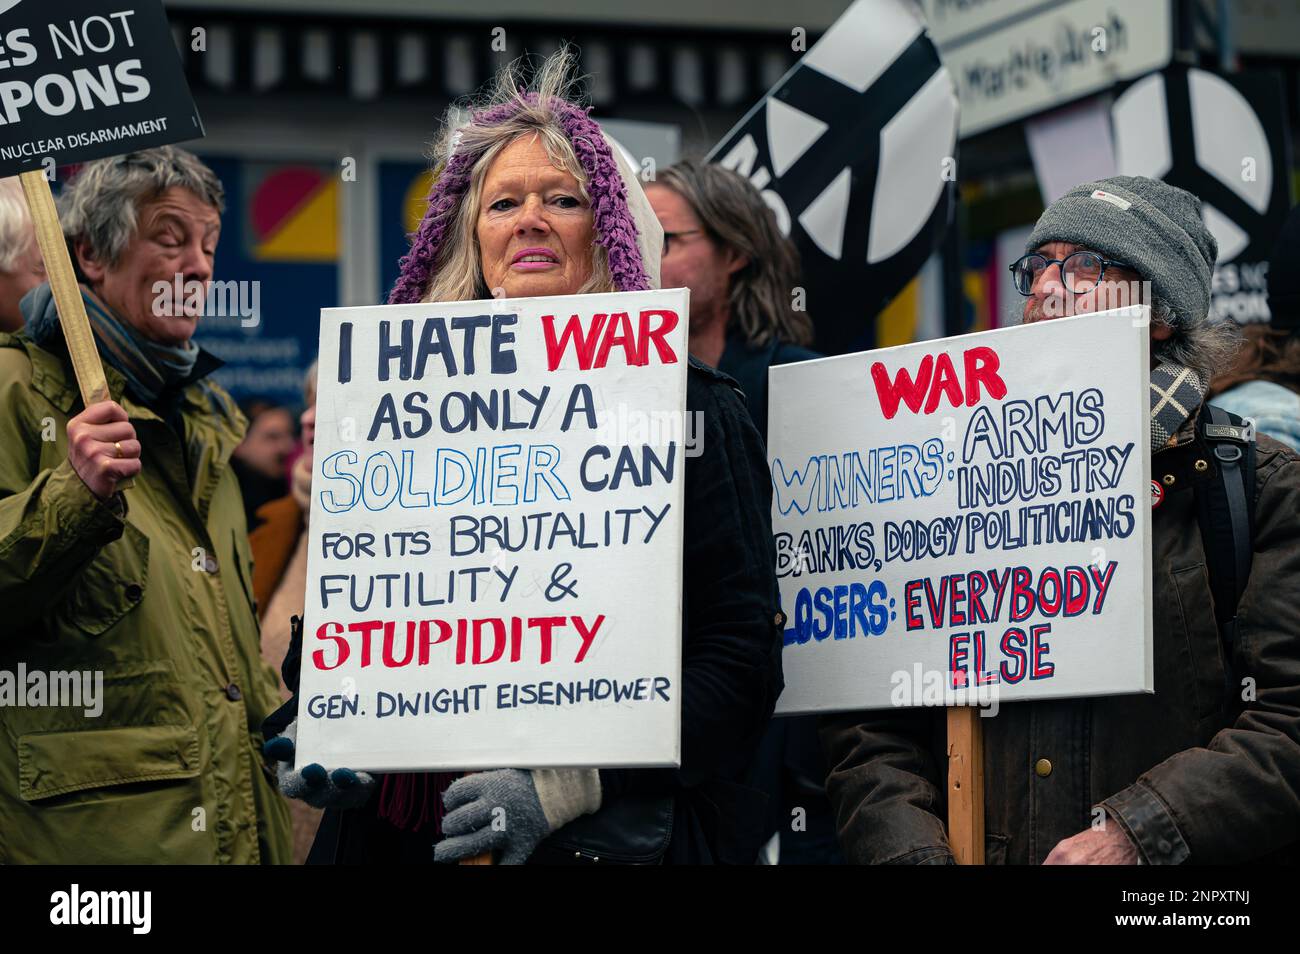 Woman holding an anti-war sign at a protest Stock Photo